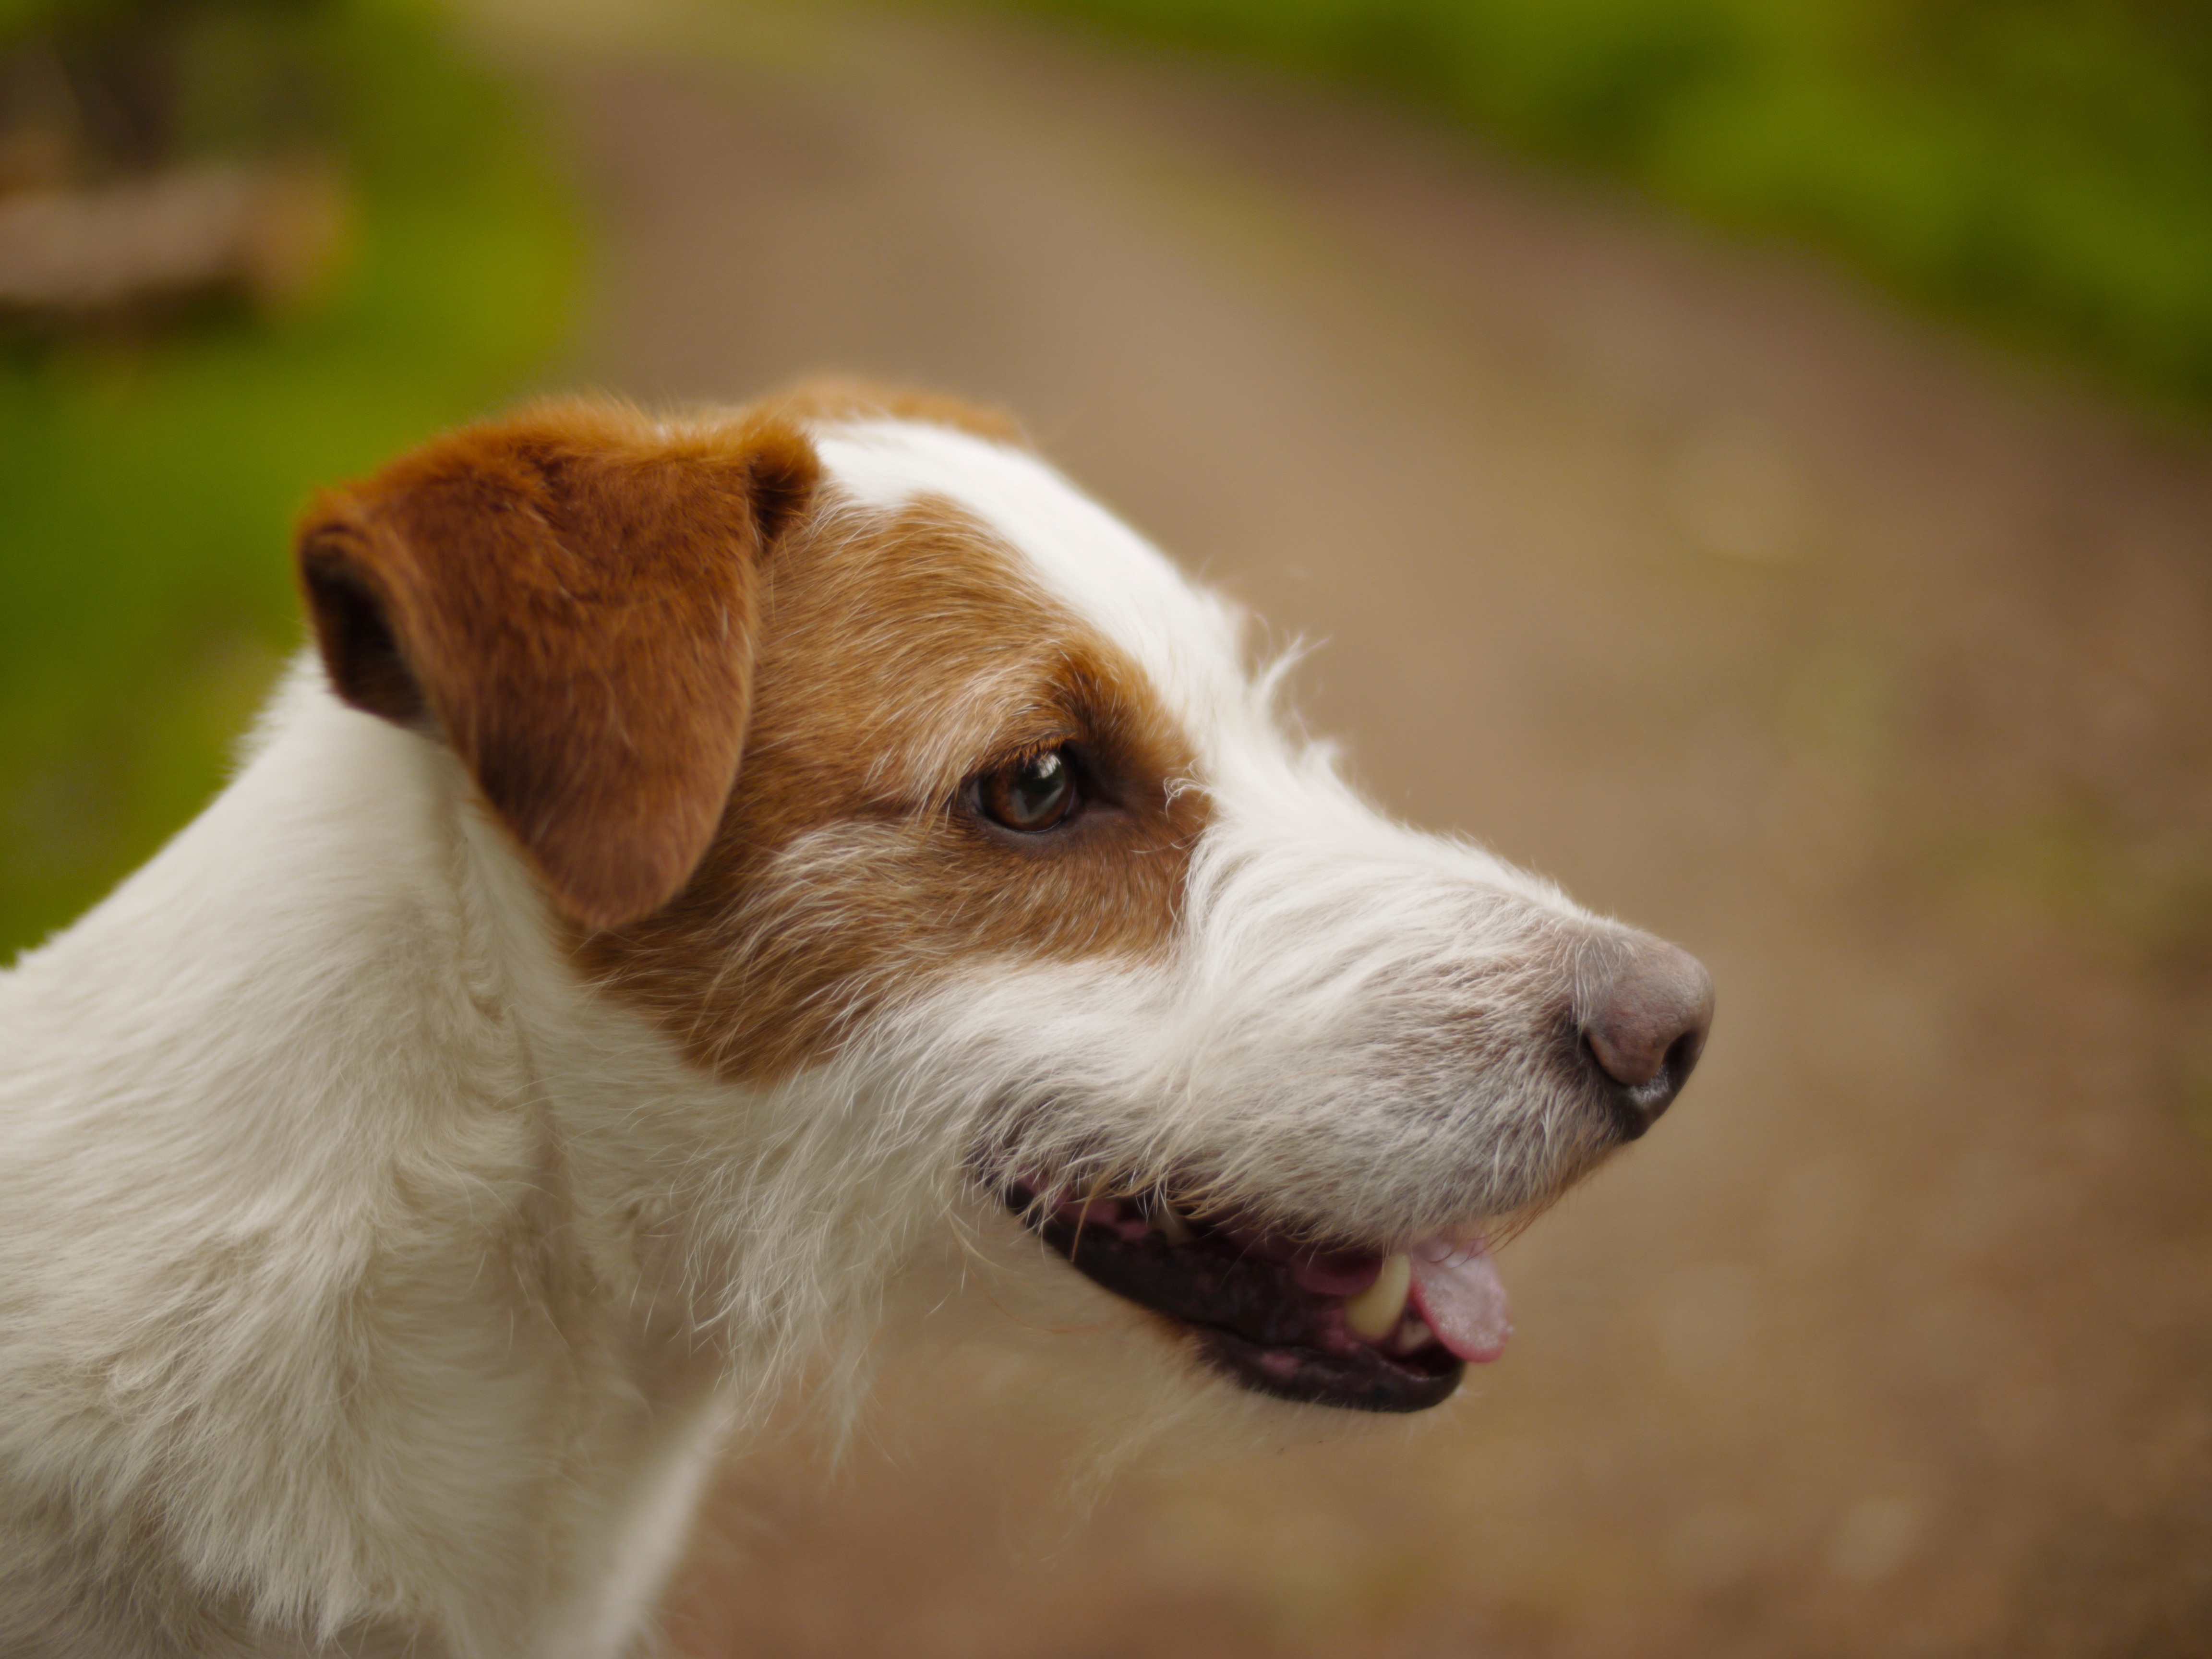 tan and white Parson russell terrier